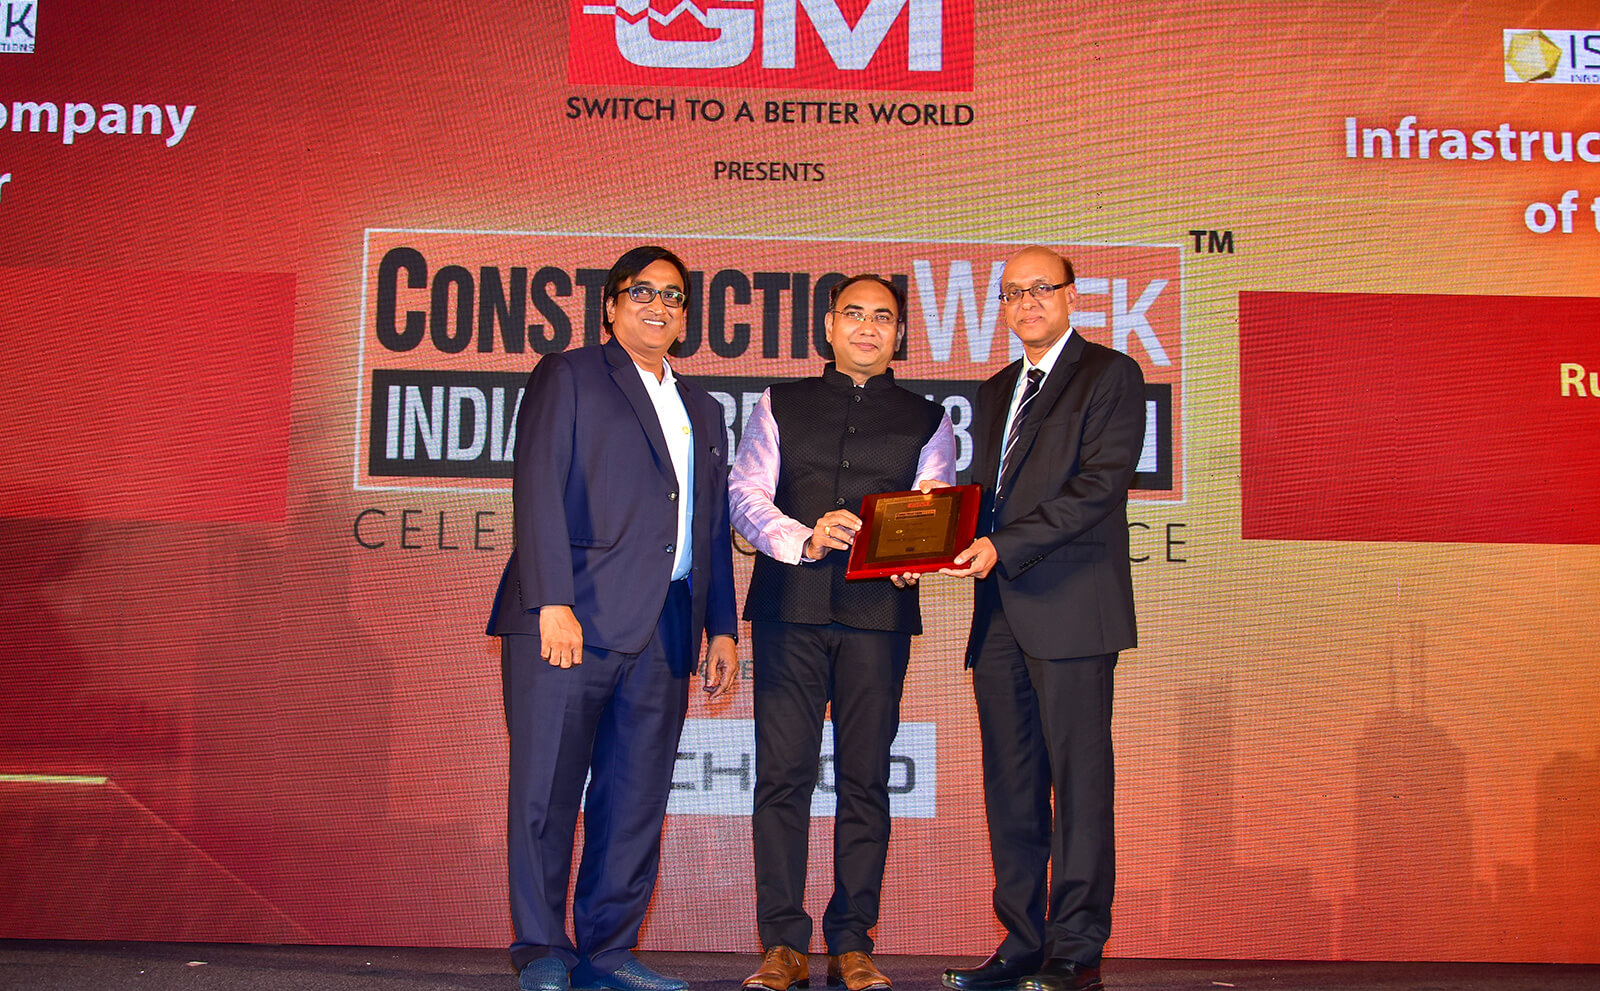 Construction Week India Annual Awards 2018